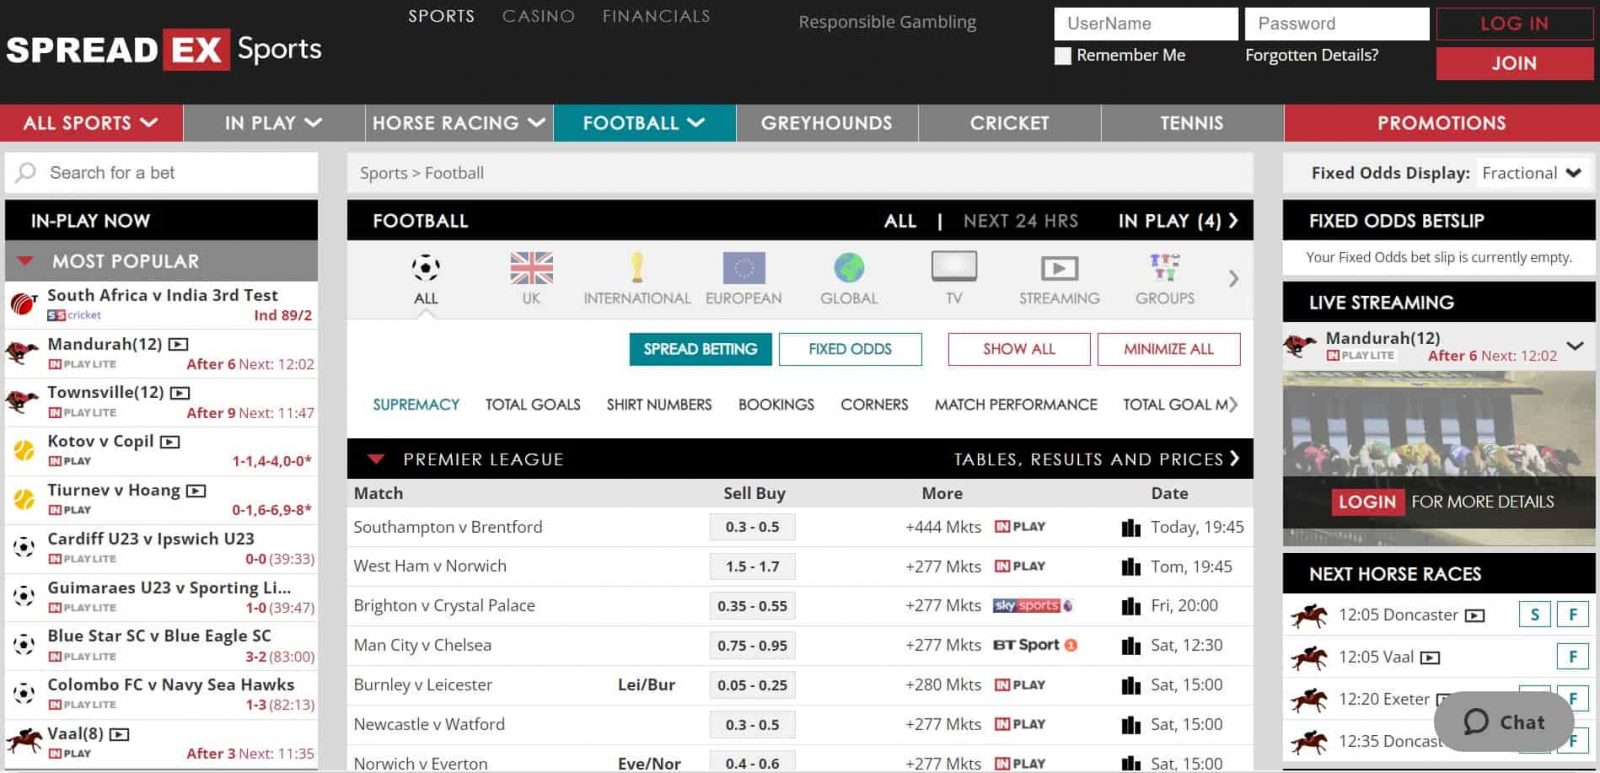 Top Sports Spread Betting Sites